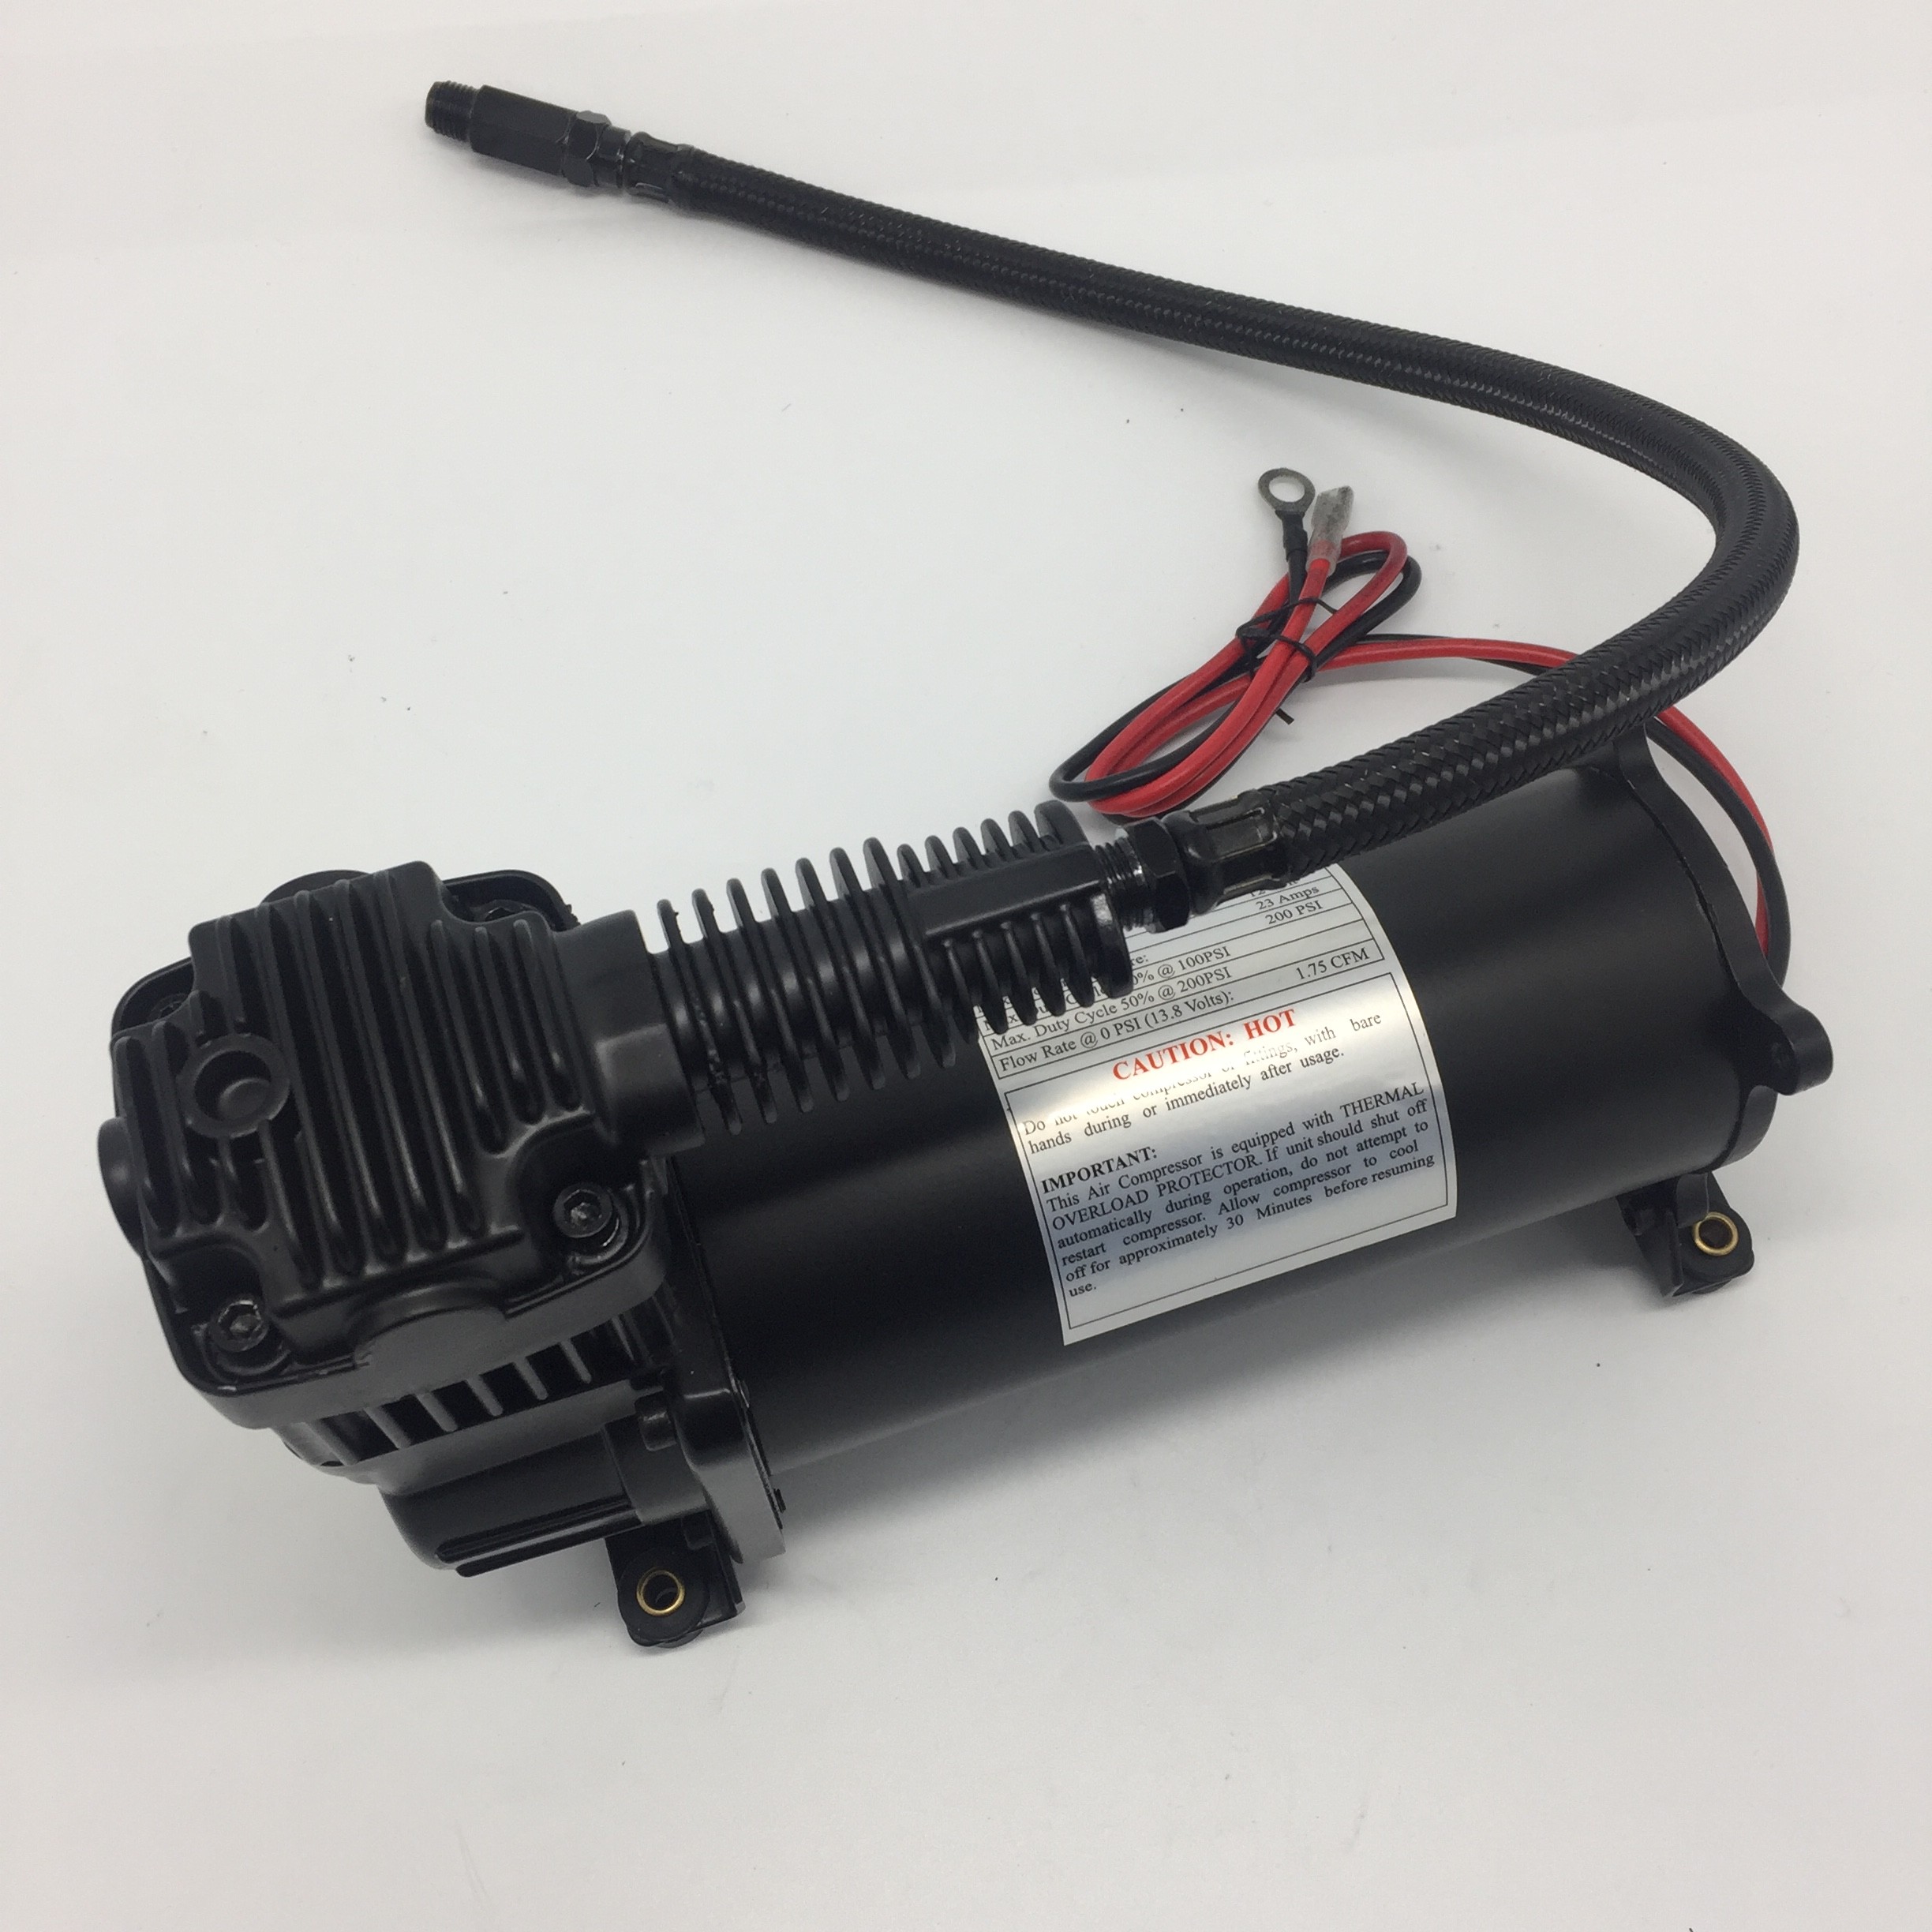 Cheap Compact Metal DC12V Air Suspension Pump for Off-road Truck , SUVs wholesale